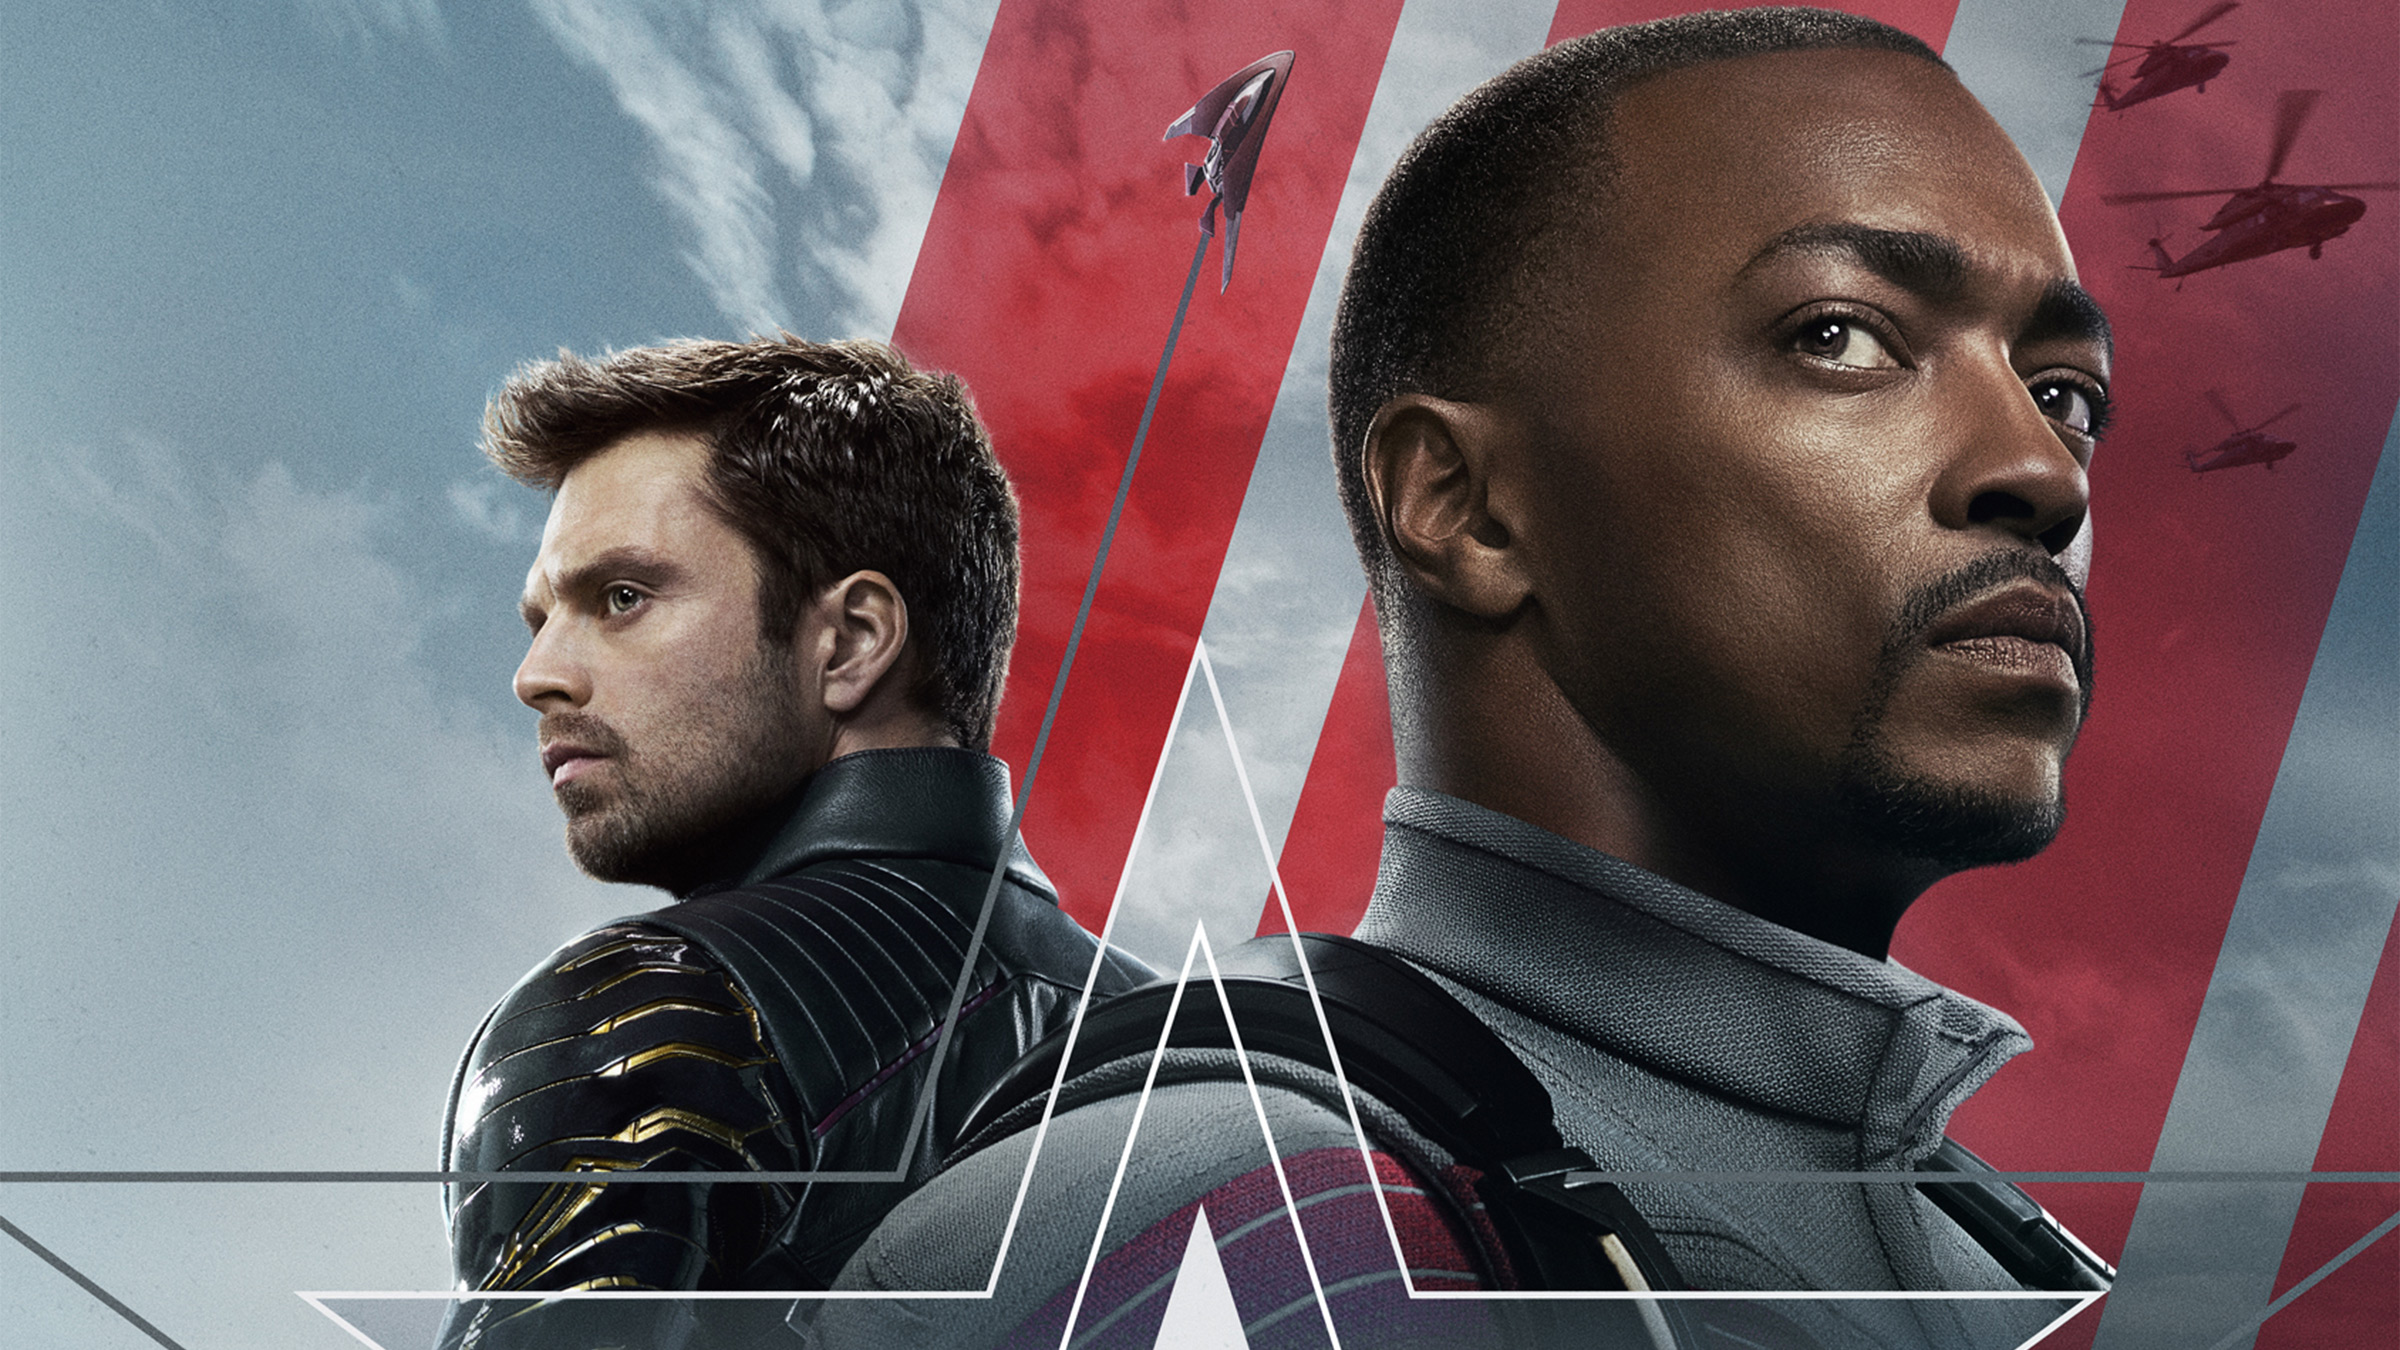 Art of the Cut: Moving Marvel Forward with “The Falcon and the Winter Soldier”